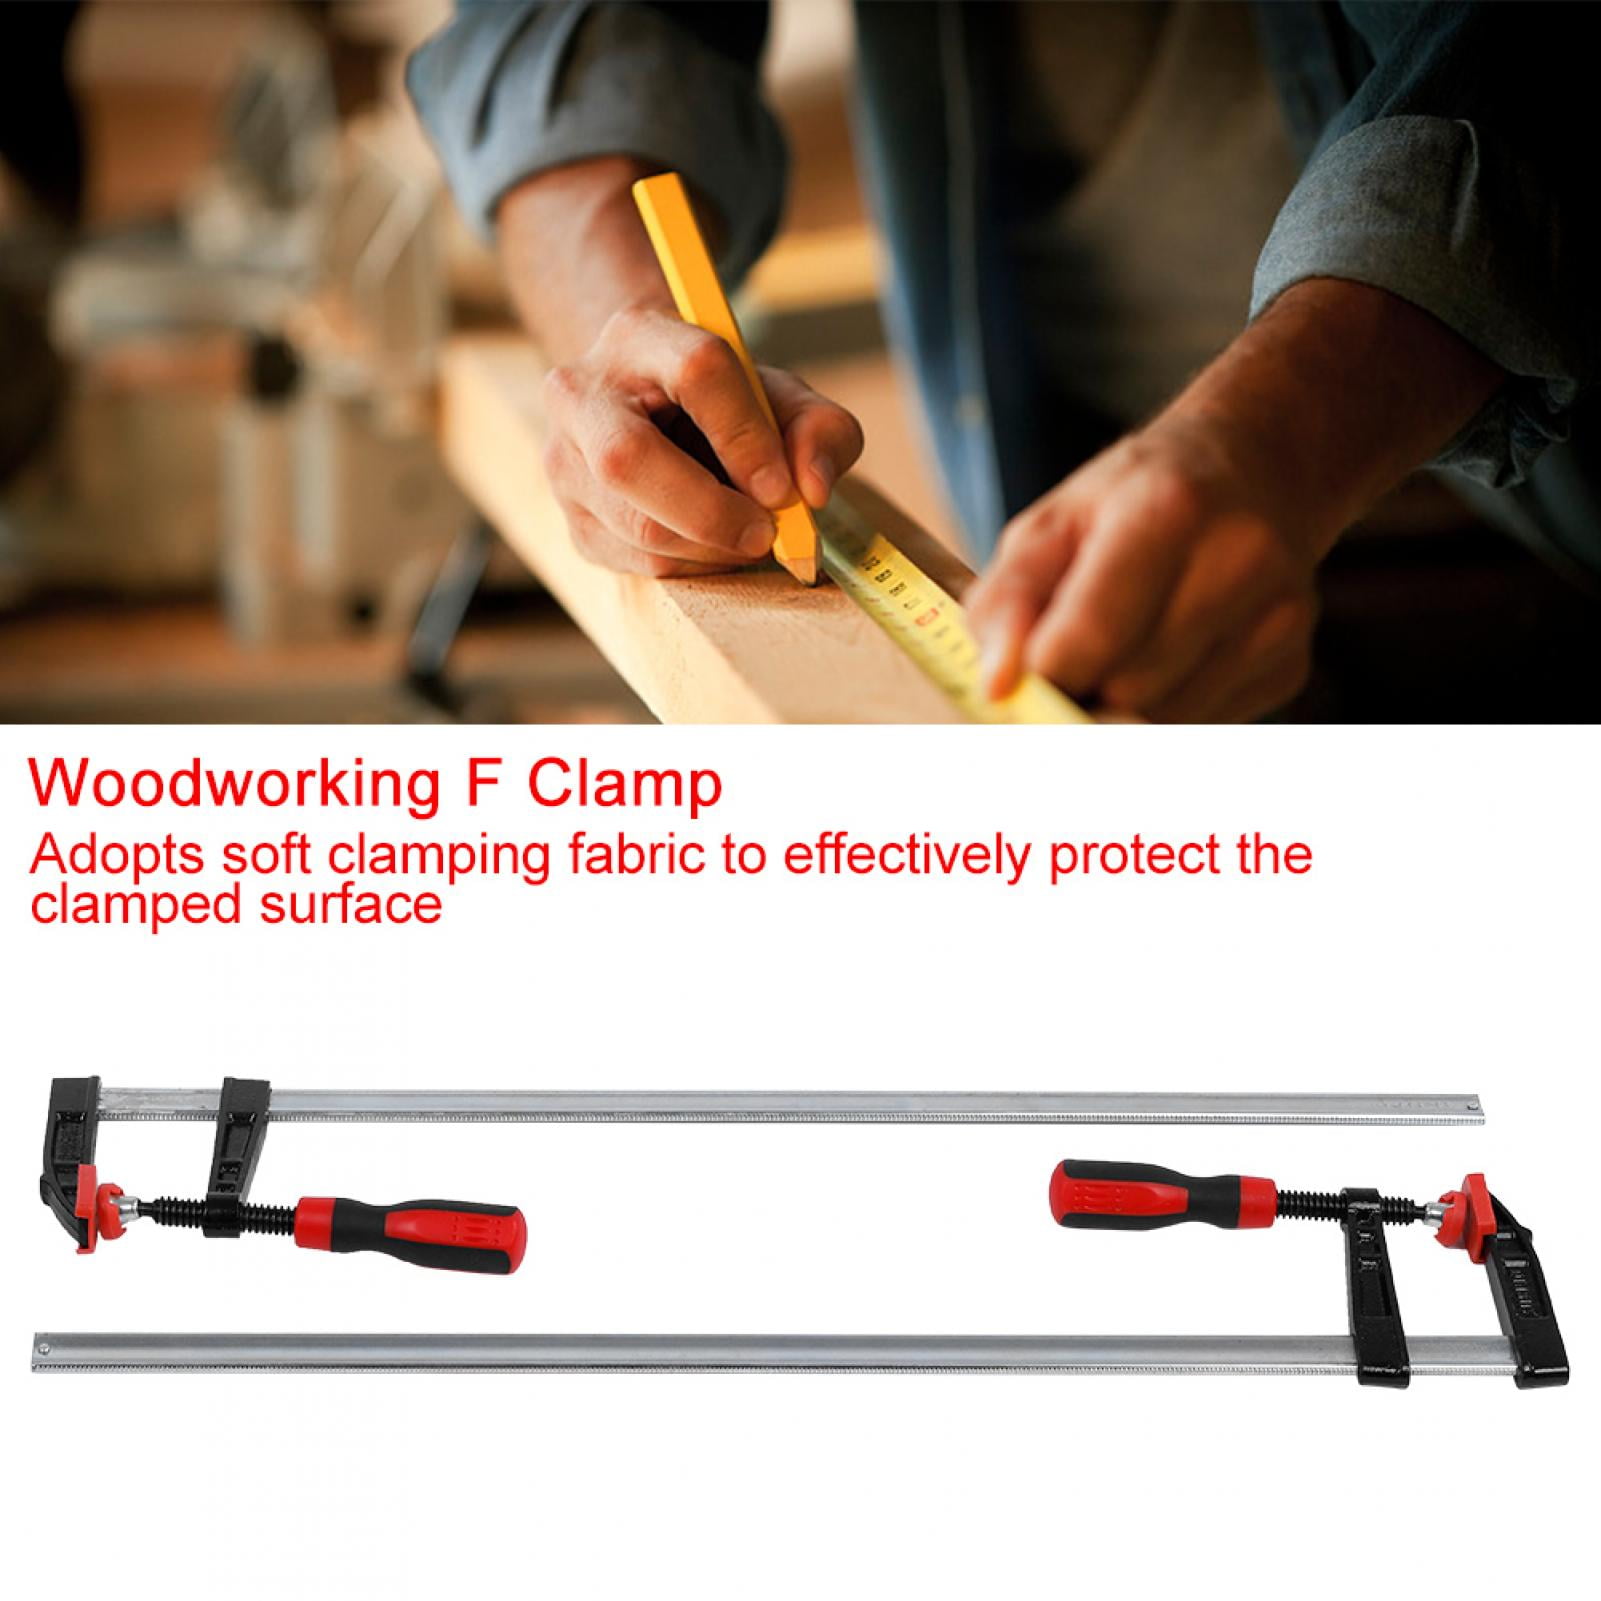 Heavy Duty Clamps for Bars Clamp Wood Working Manual Tool Kit 80 * 600mm F Clamps 2 pieces Screw Clamps 